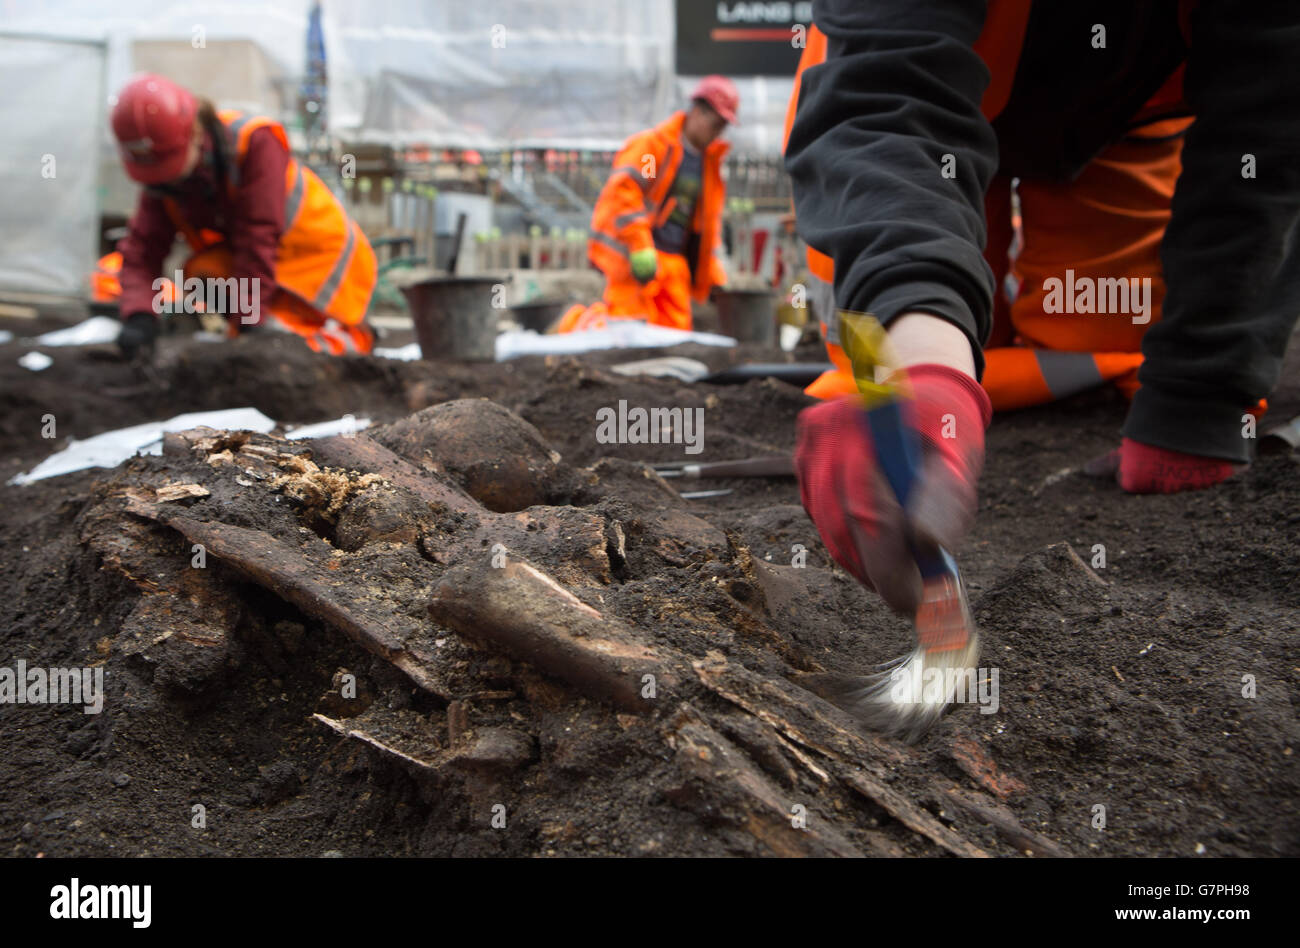 An archaeologist from MOLA (Museum of London Archaeology) works at the Bedlam burial ground, where over 20,000 Londoners are believed to have been buried between 1569 and 1738, the excavation will allow the construction of East entrance of the New Liverpool St. Crossrail Ticket station, Liverpool Street, London. Stock Photo